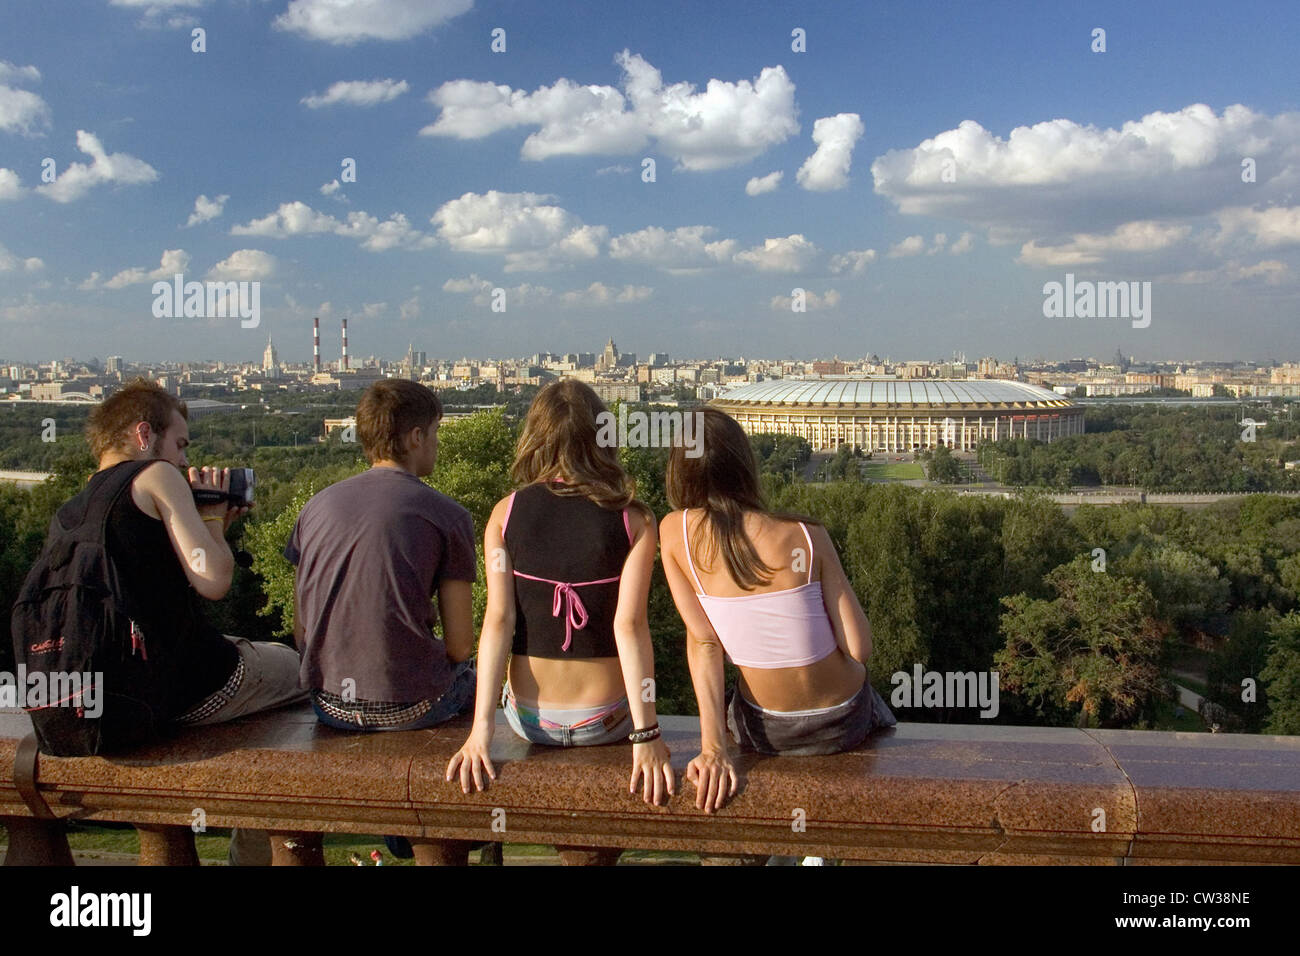 Moscow, a group of young people looks at the Luzhniki Stadium Stock Photo